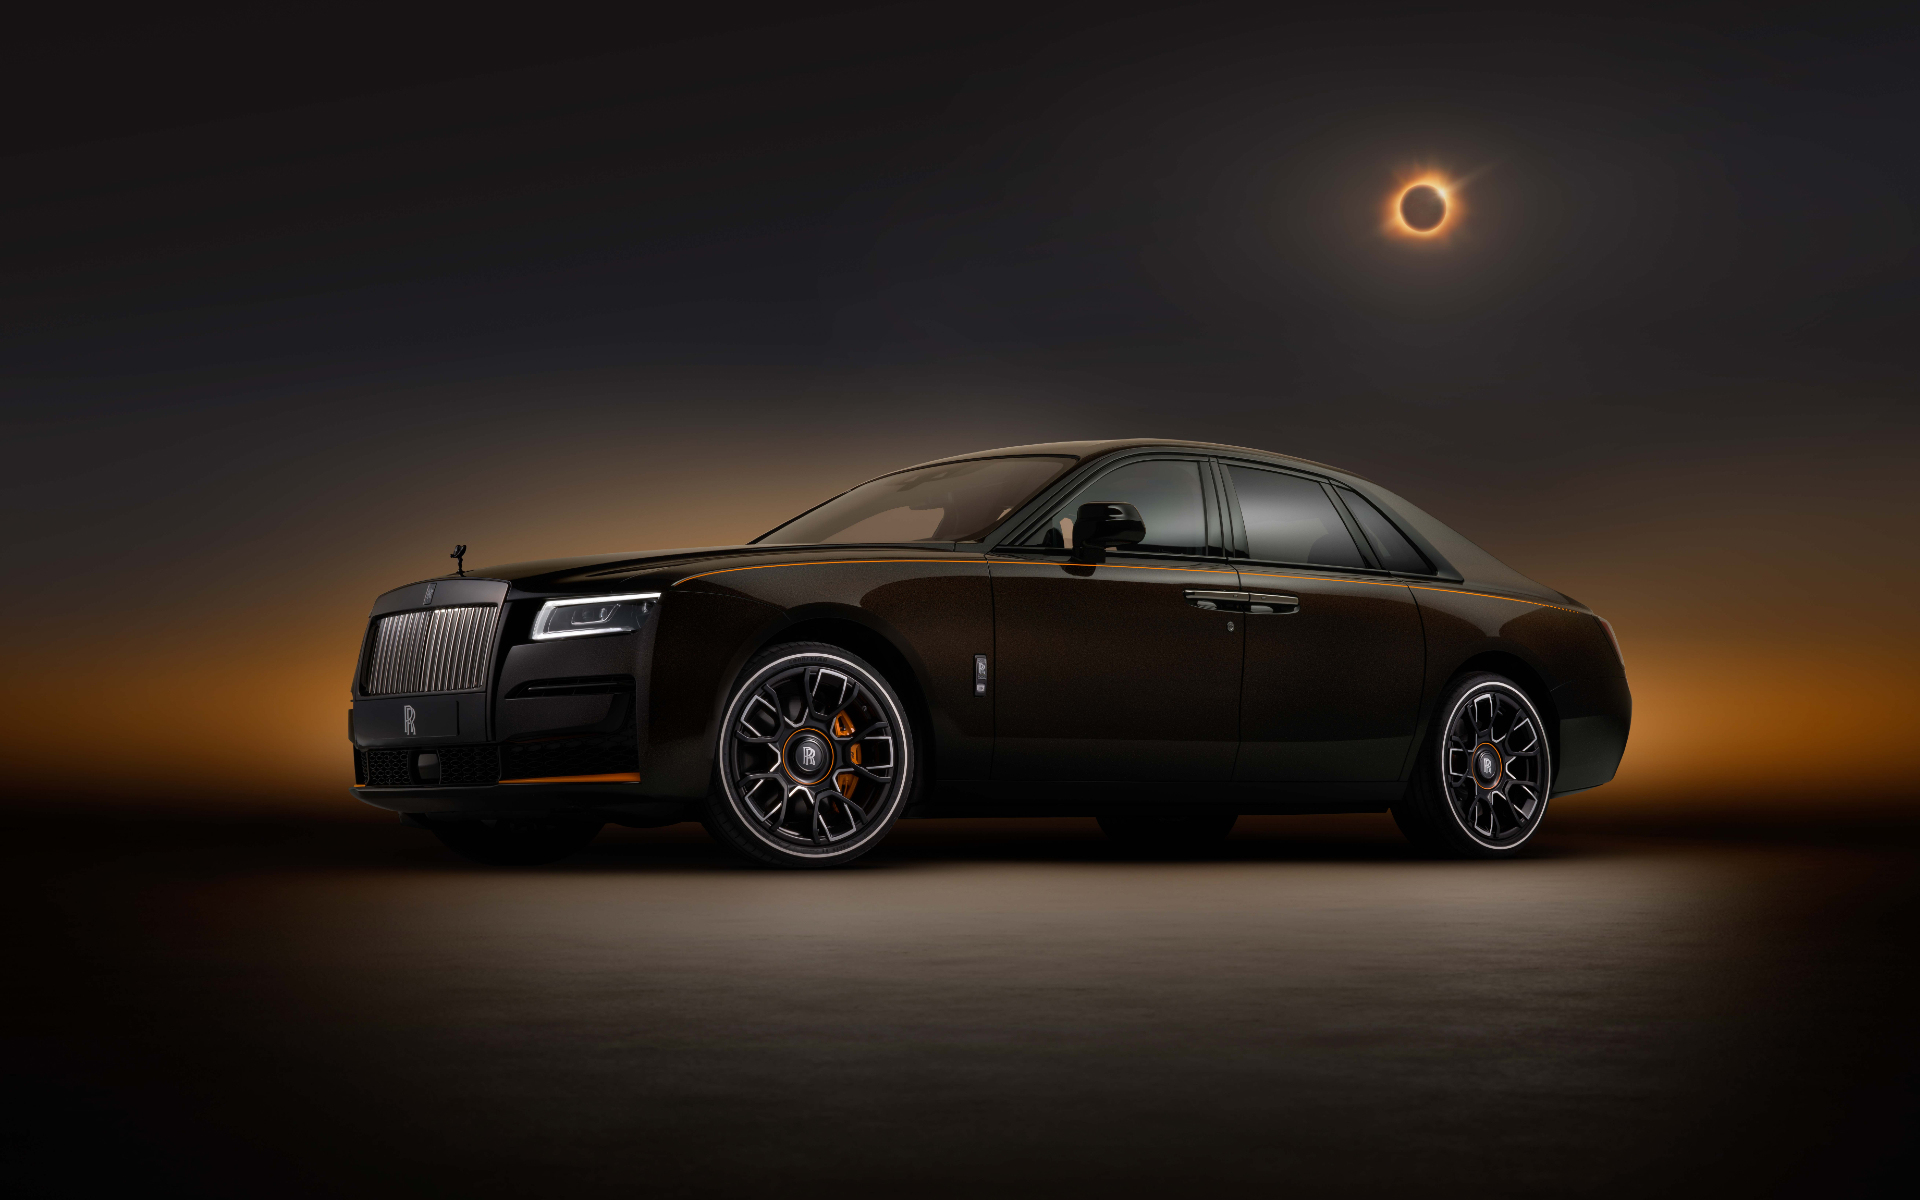 5 standout features on the Rolls Royce Black Badge Ghost Ékleipsis